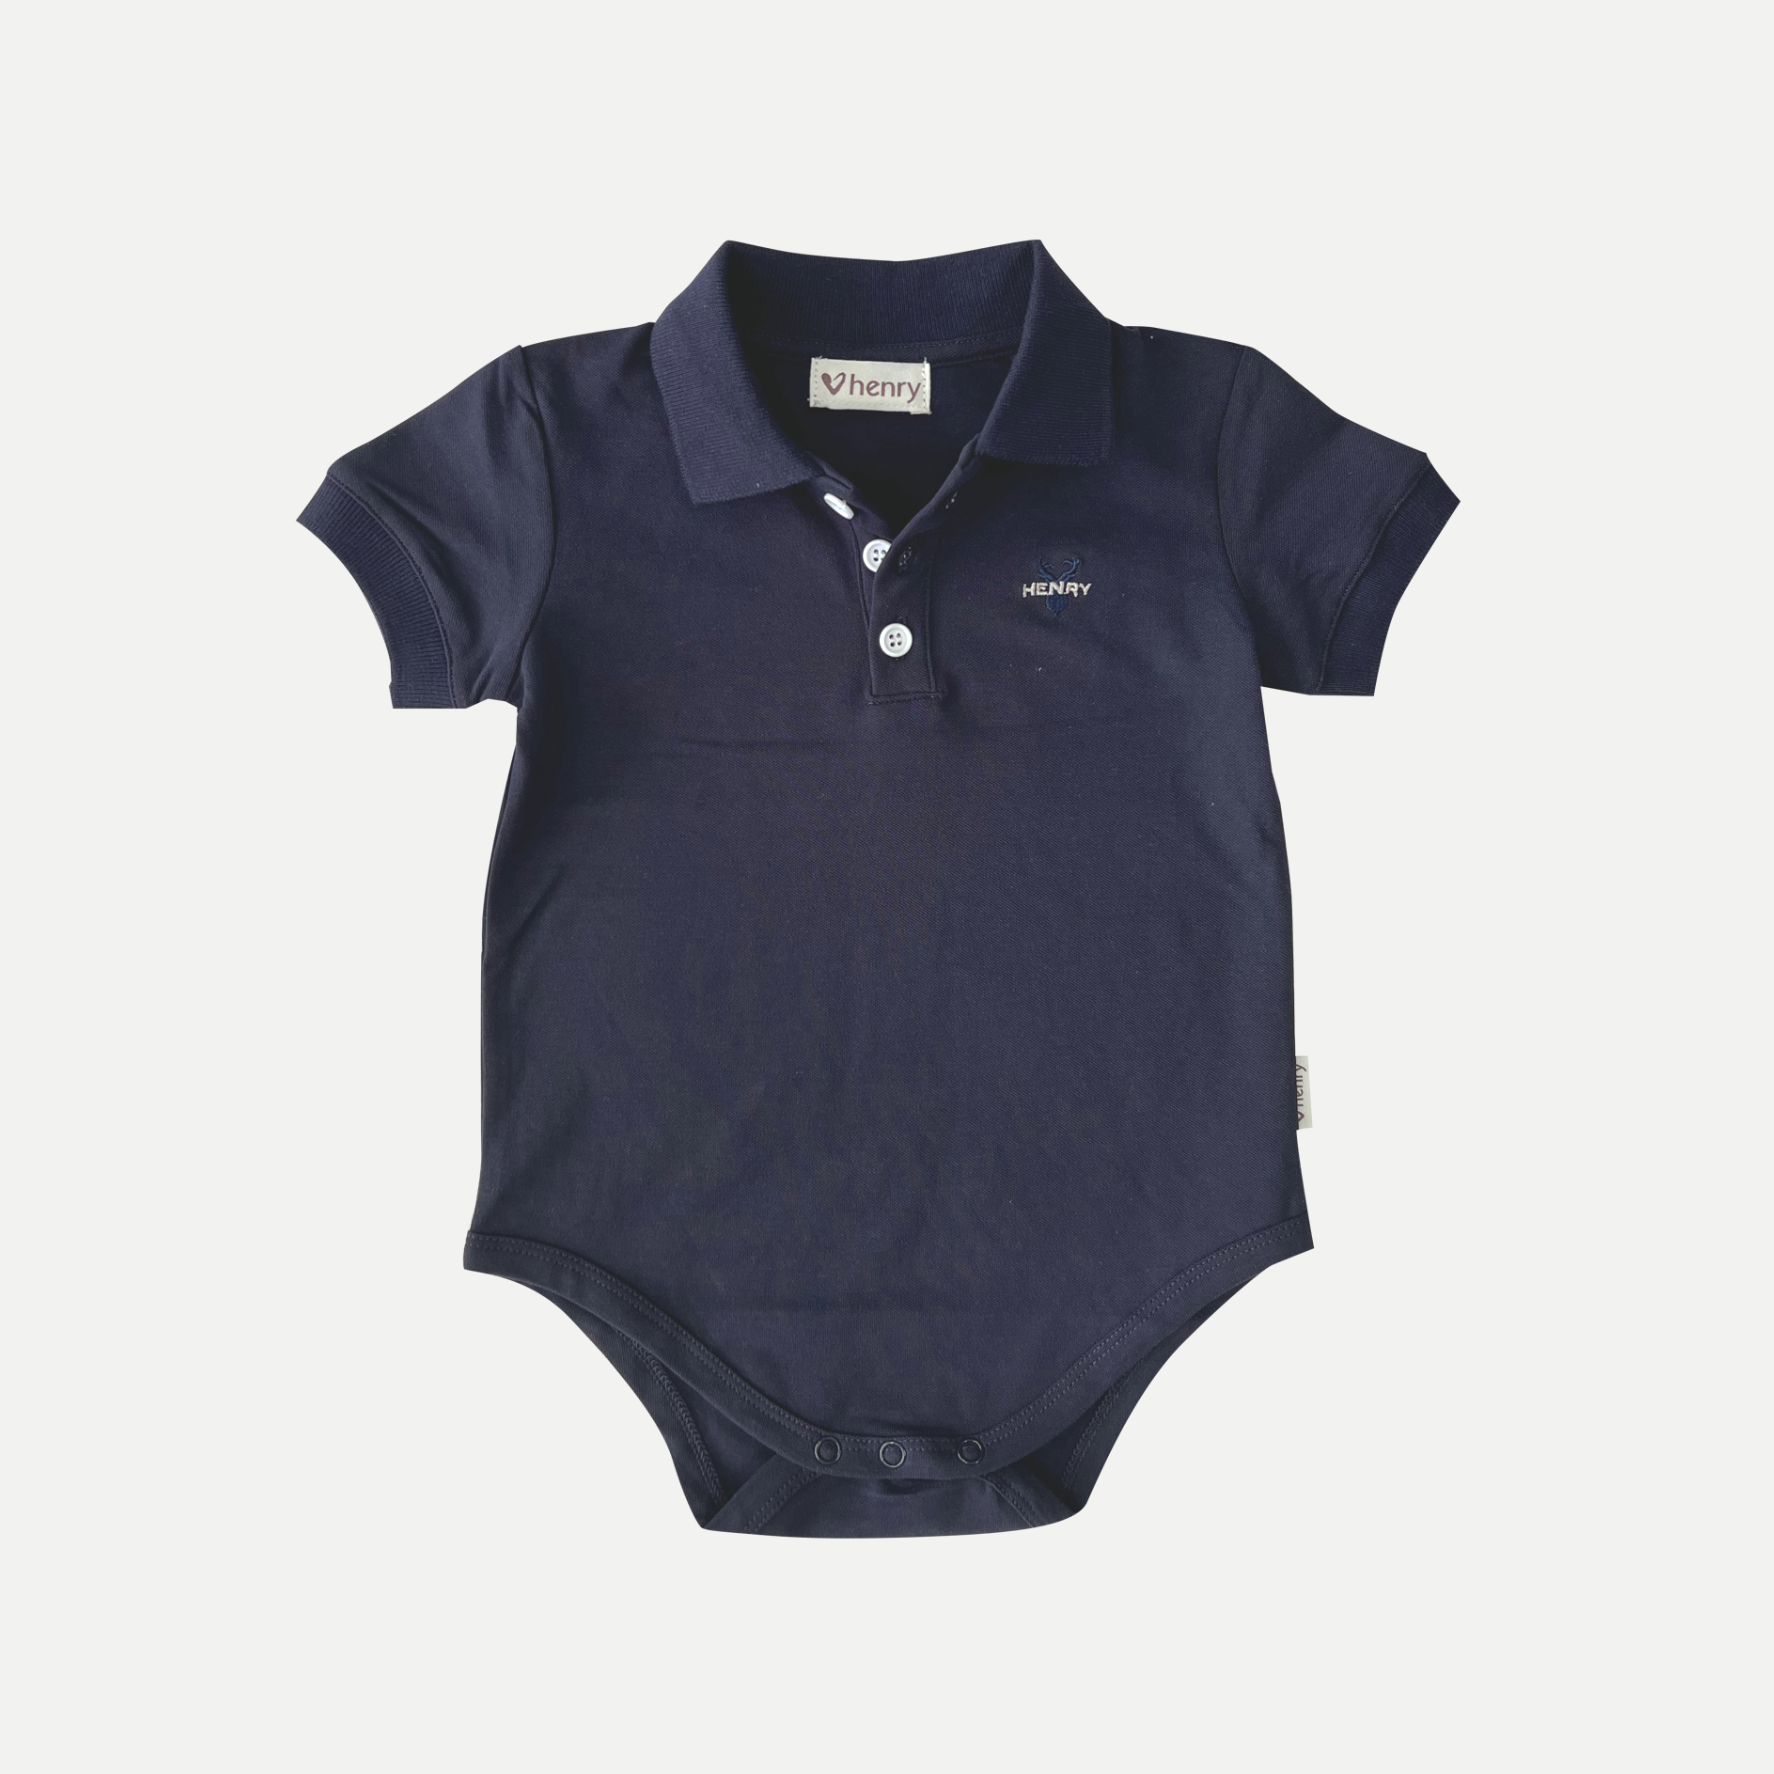 Love henry polo romper - angus and dudley